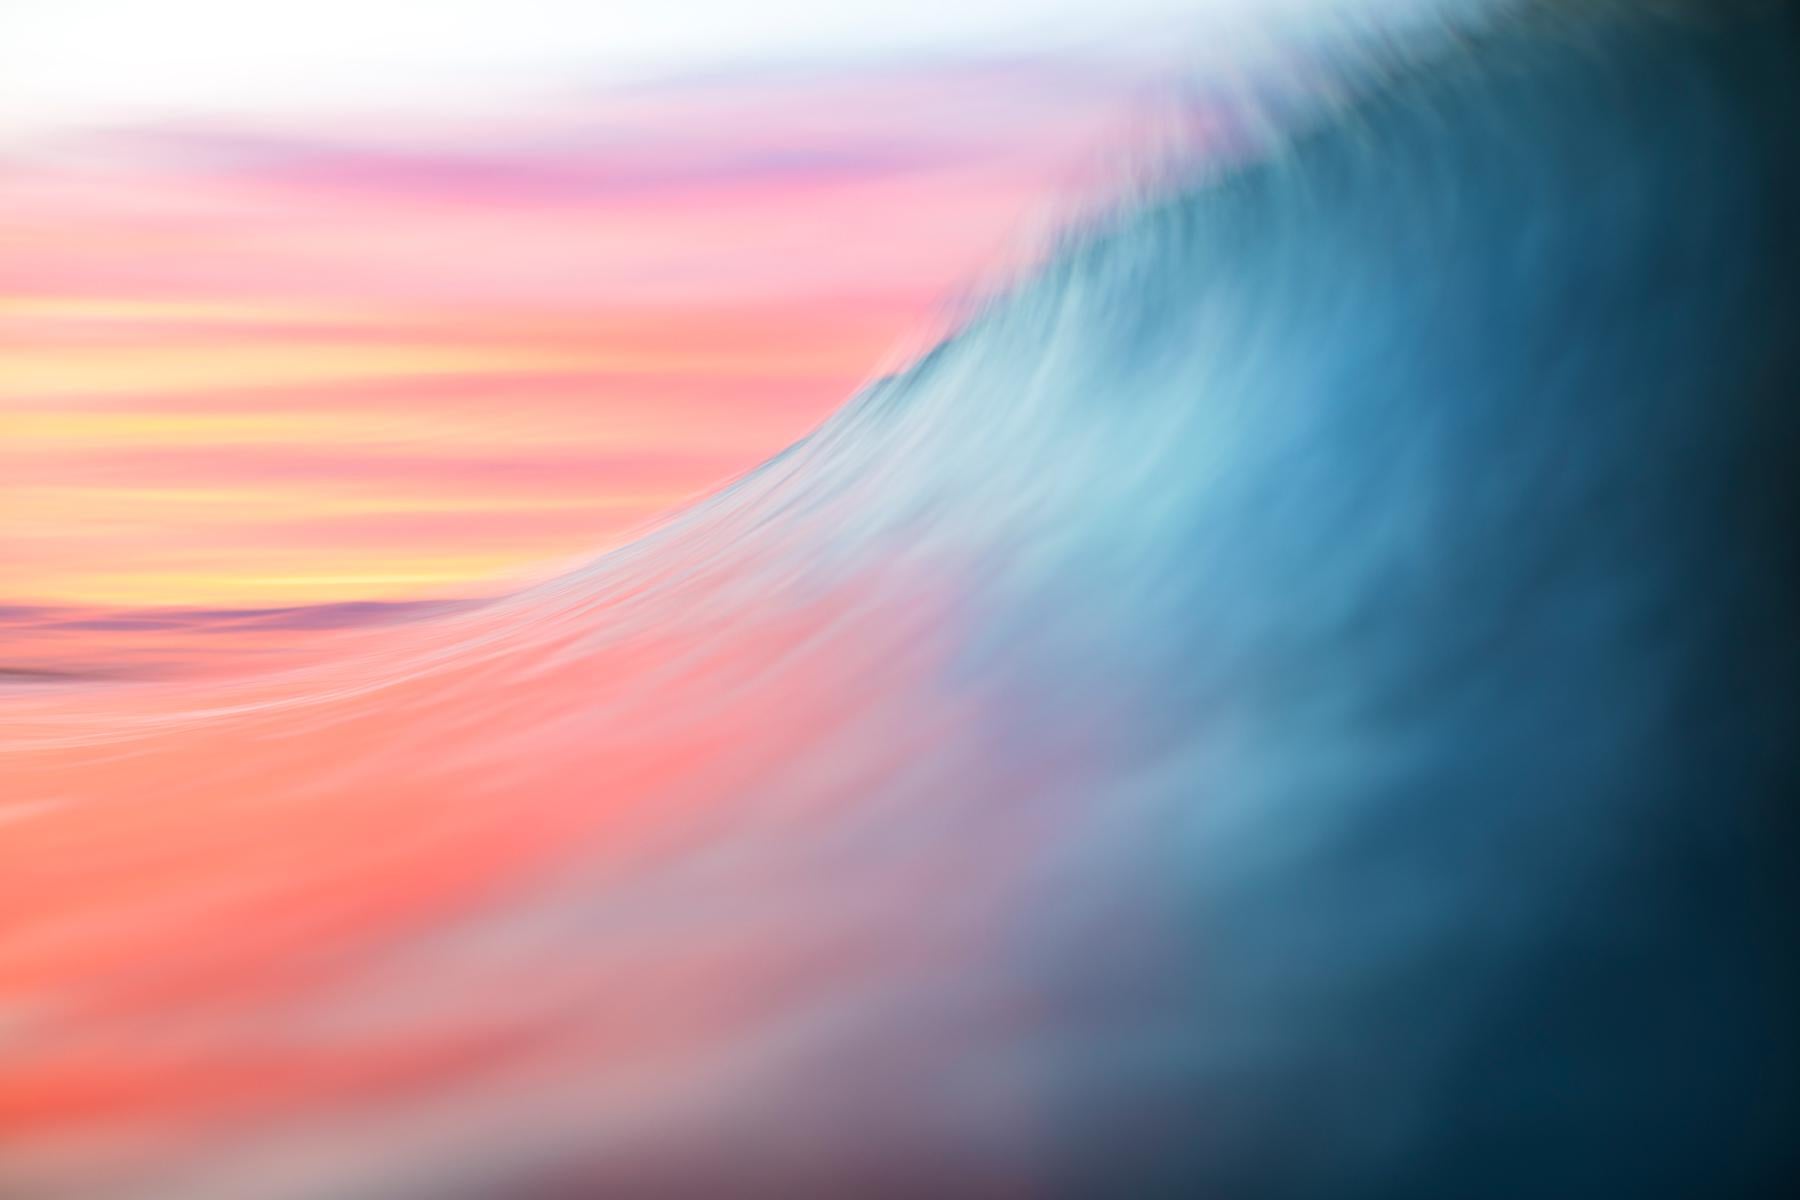 Danny Weiss Color Photograph - Abstract Seascape,  Large-scale water photograph in coral, rose, violet, blue 